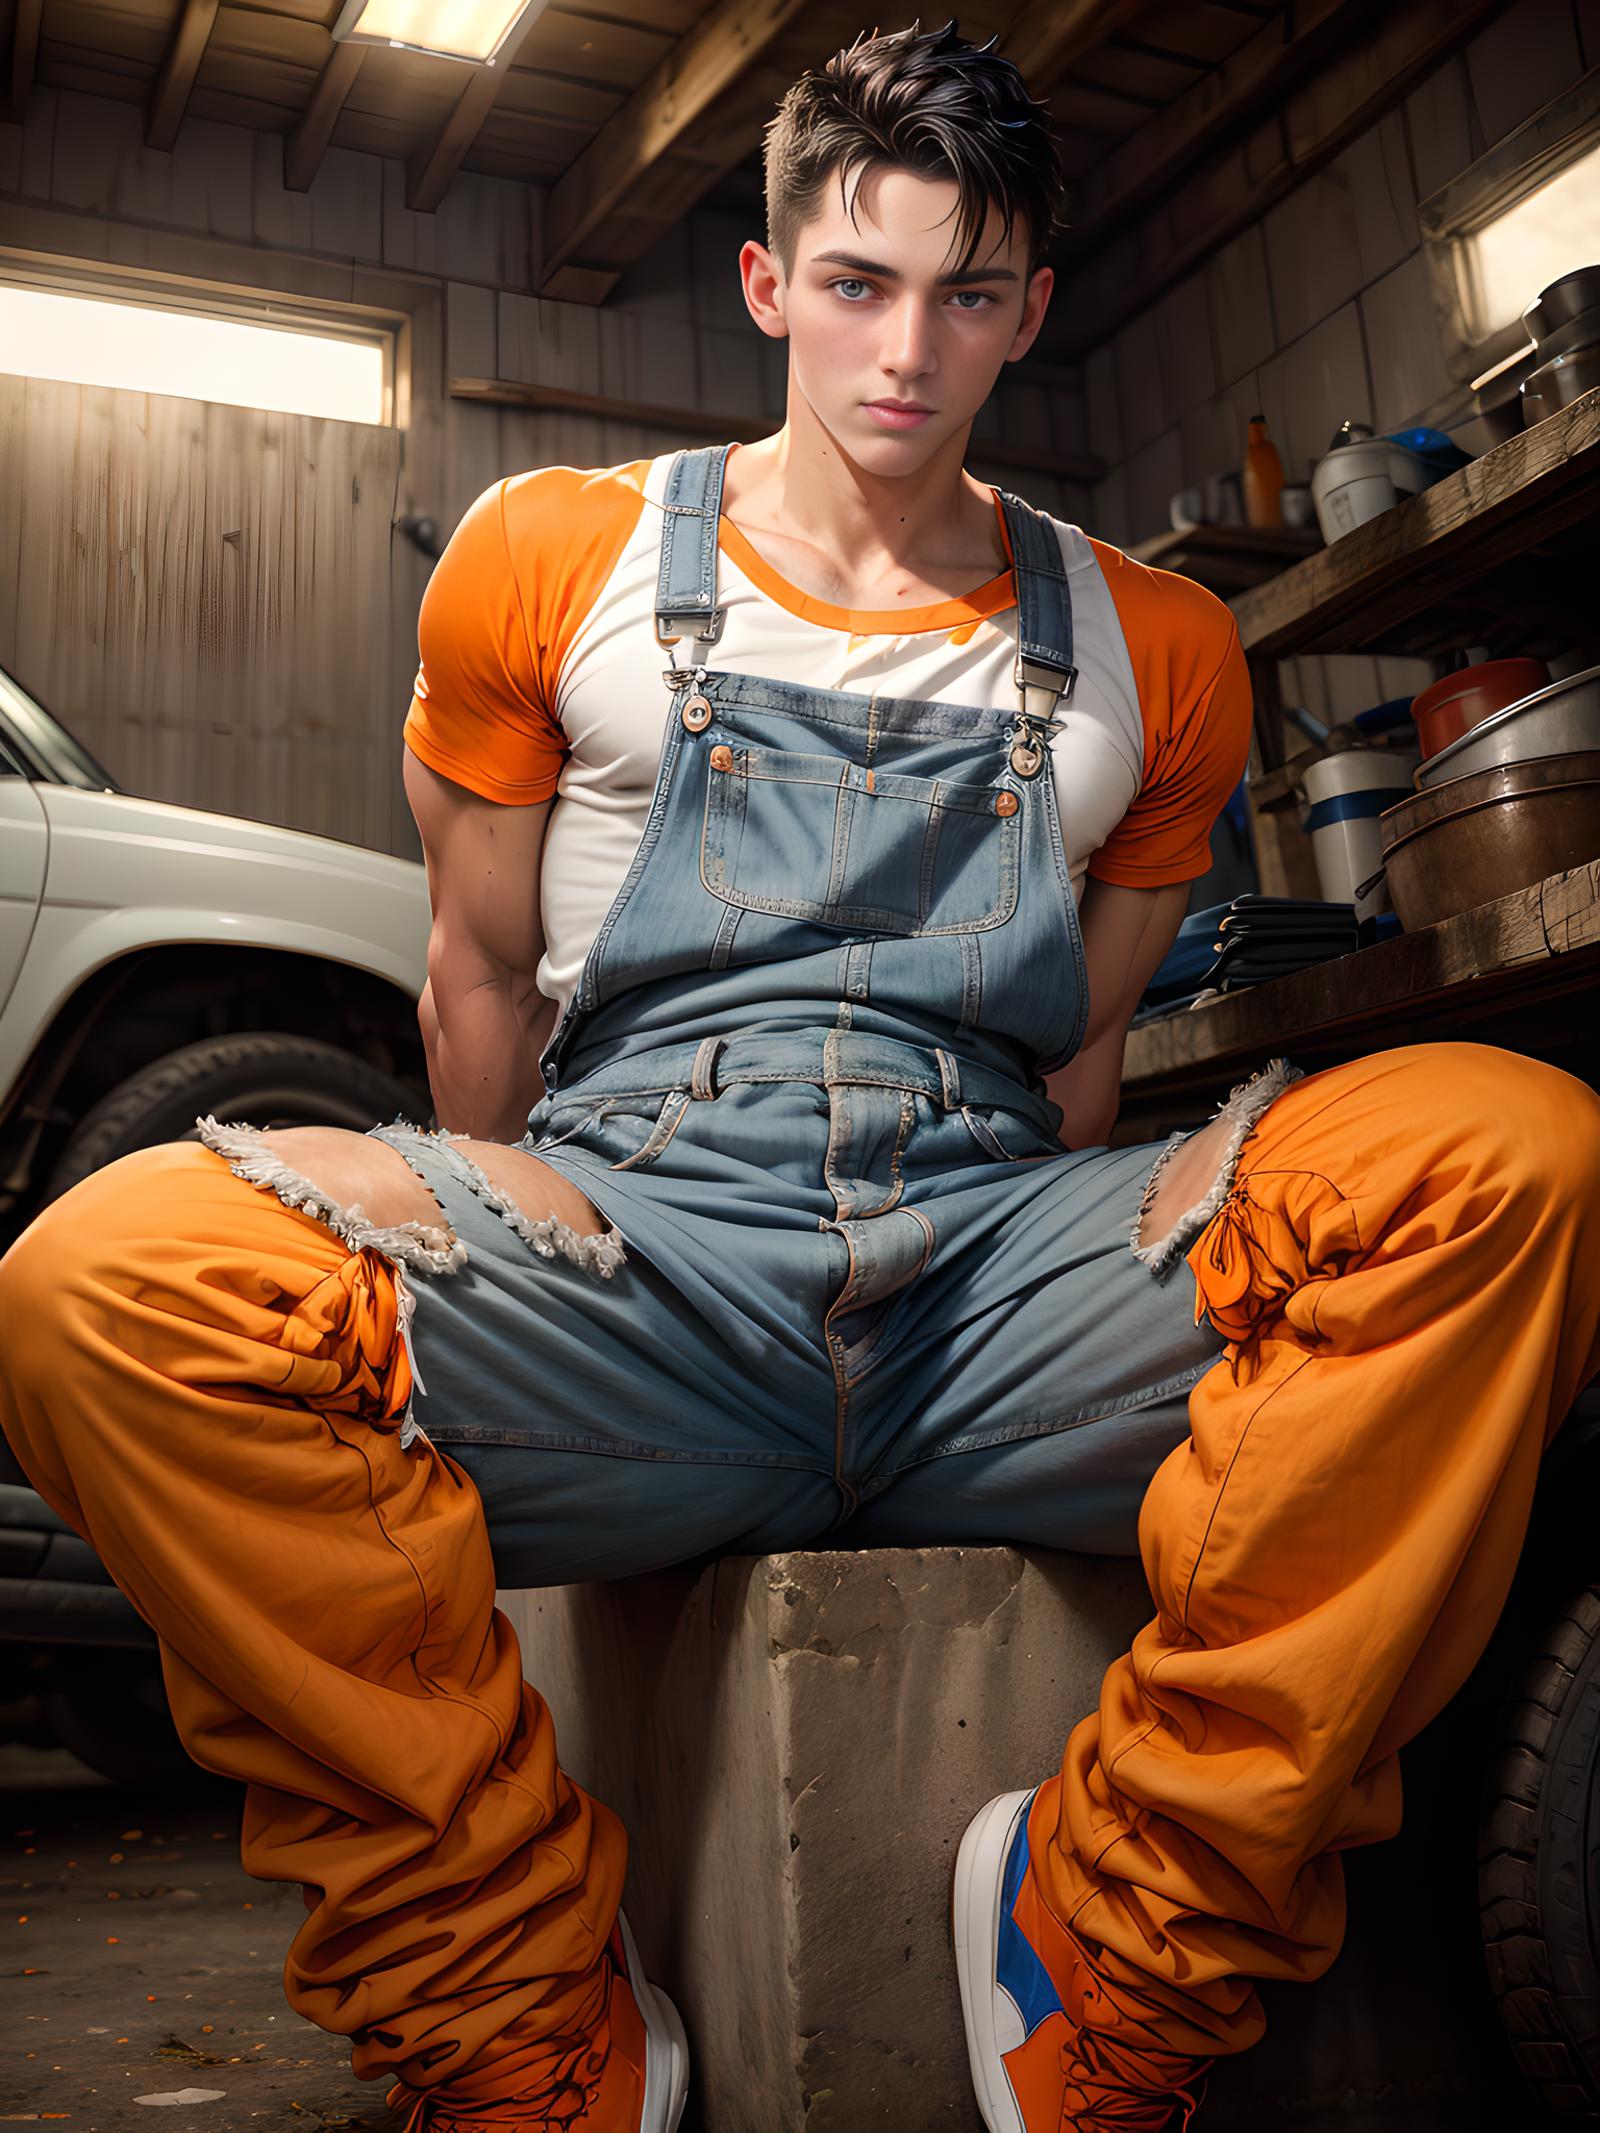 Sexy Mechanic Overalls image by stefan501